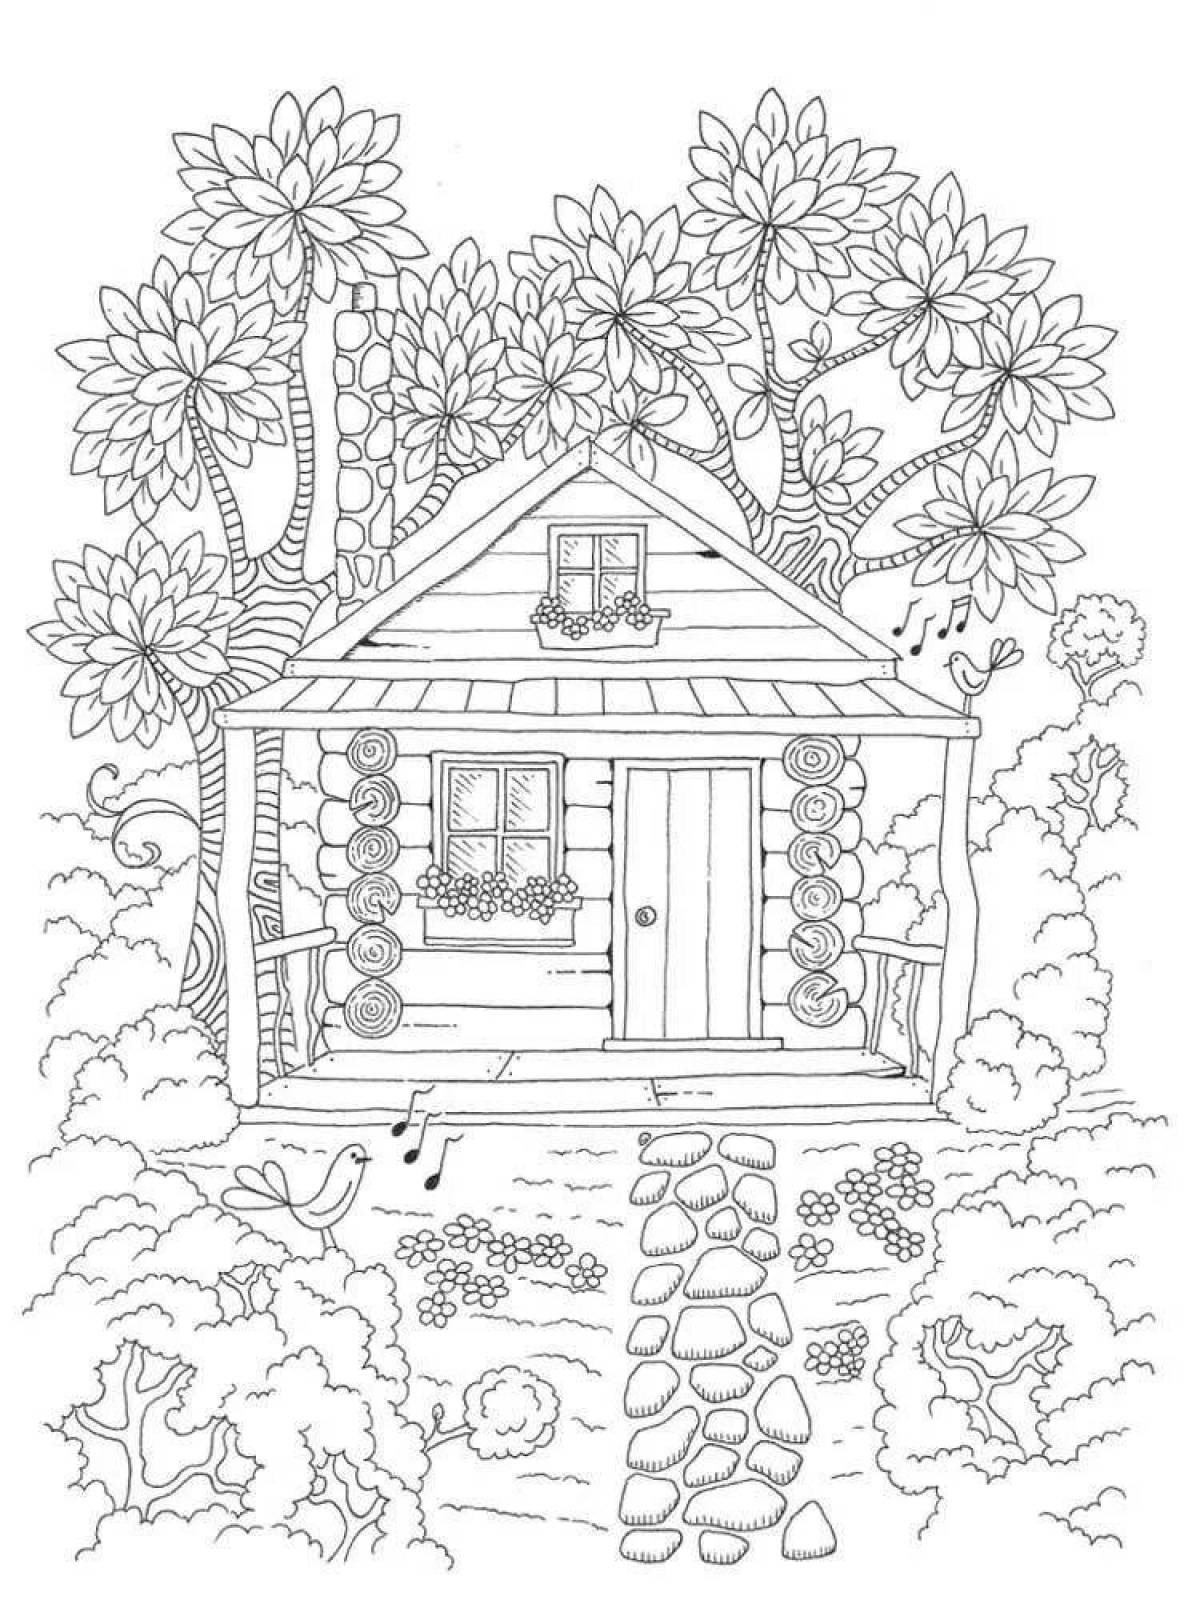 Delightful forest house coloring book